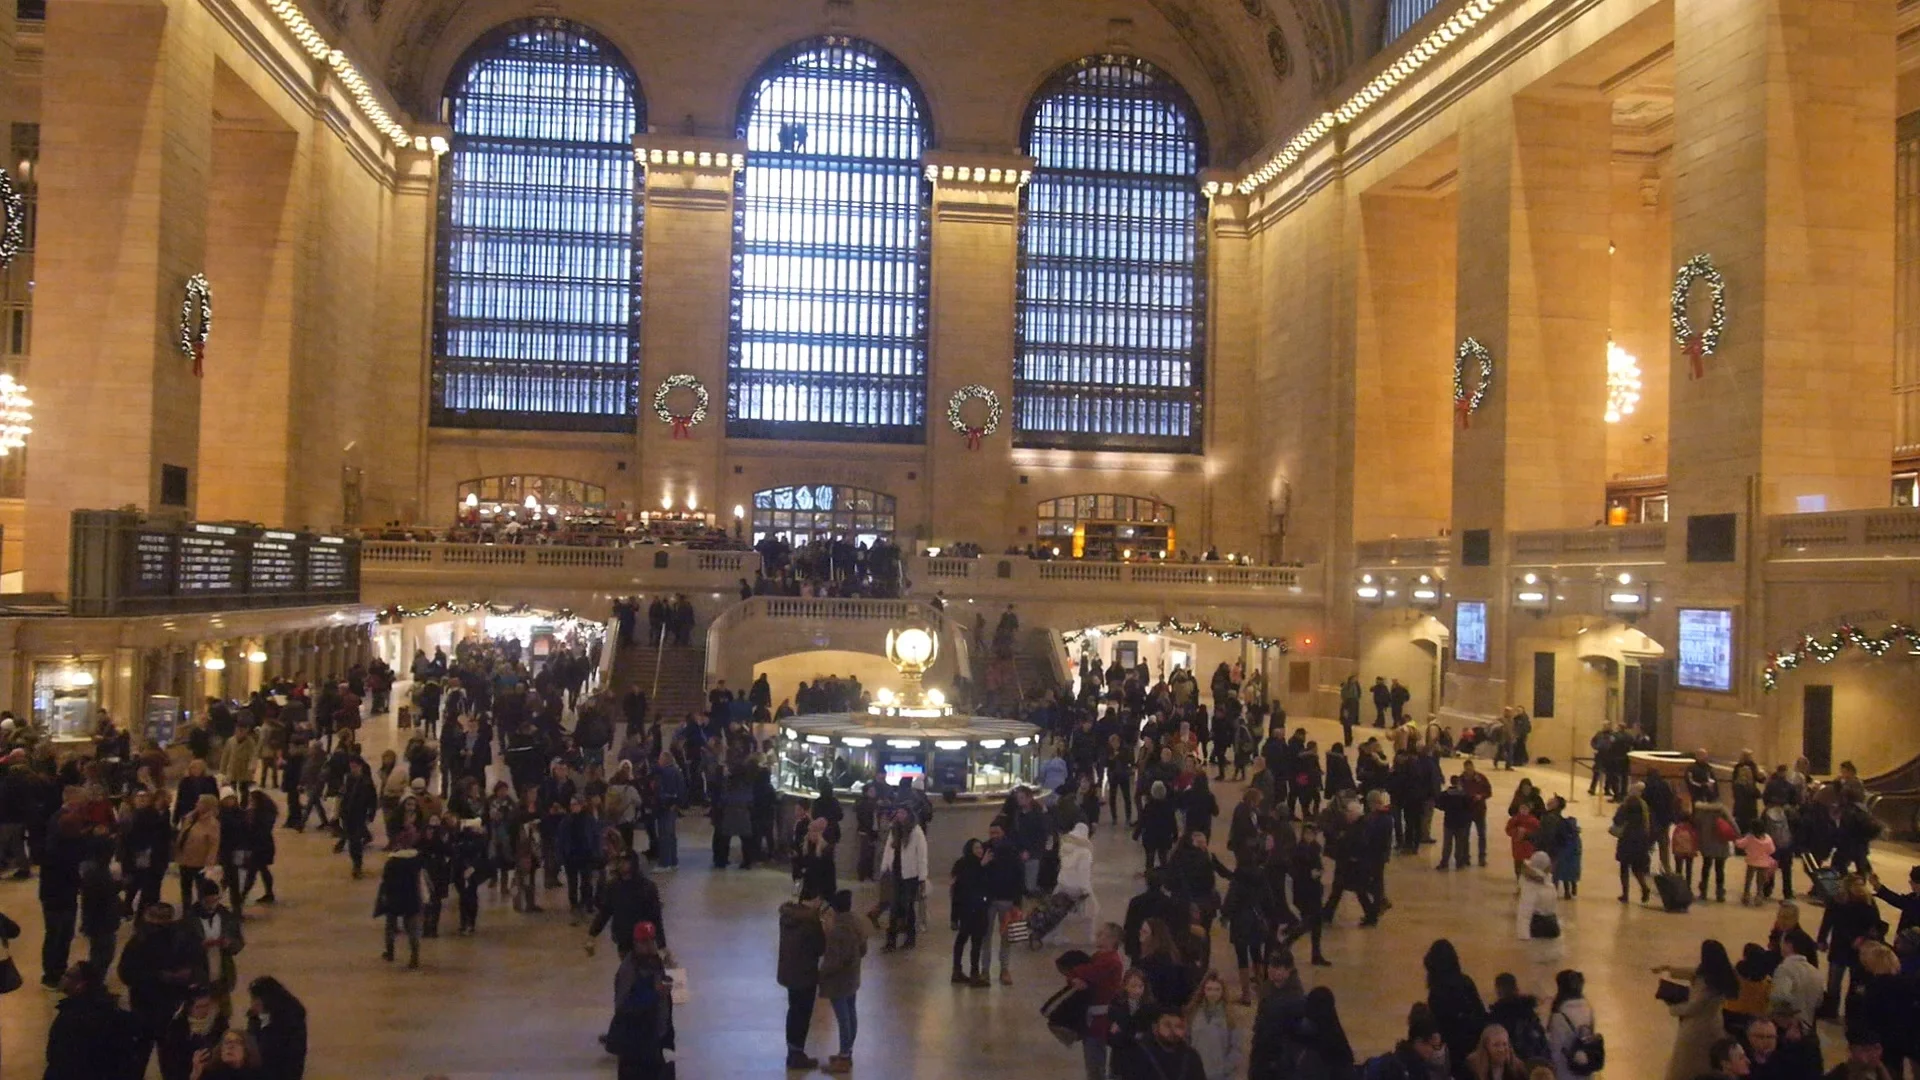 grand central station crowded